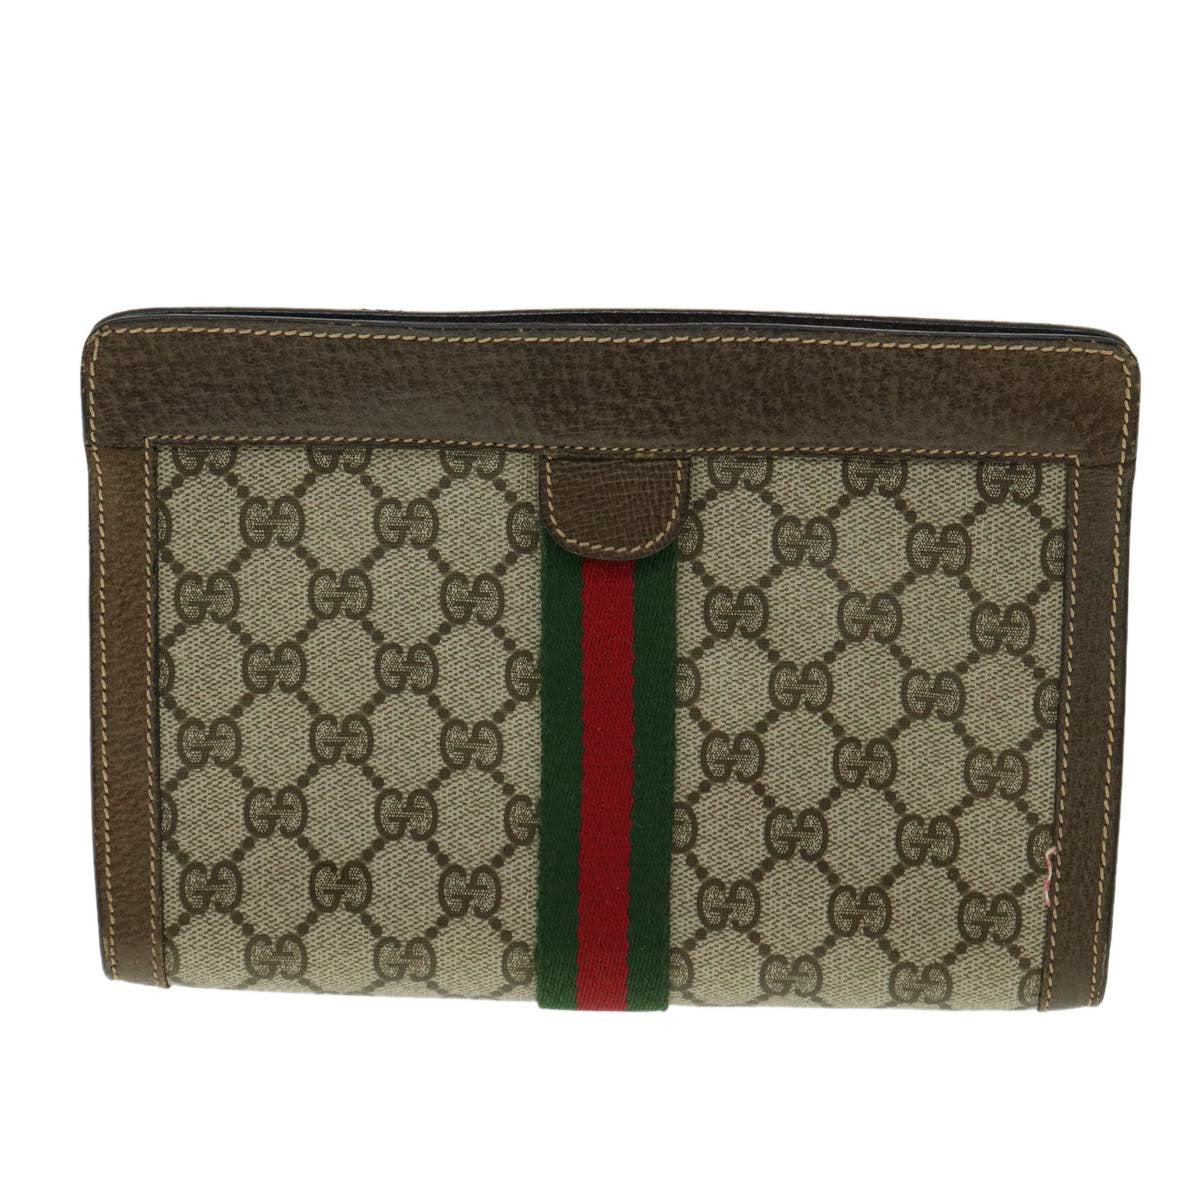 GUCCI GG Canvas Web Sherry Line Clutch Bag Beige Red Green Auth am3107 - 0